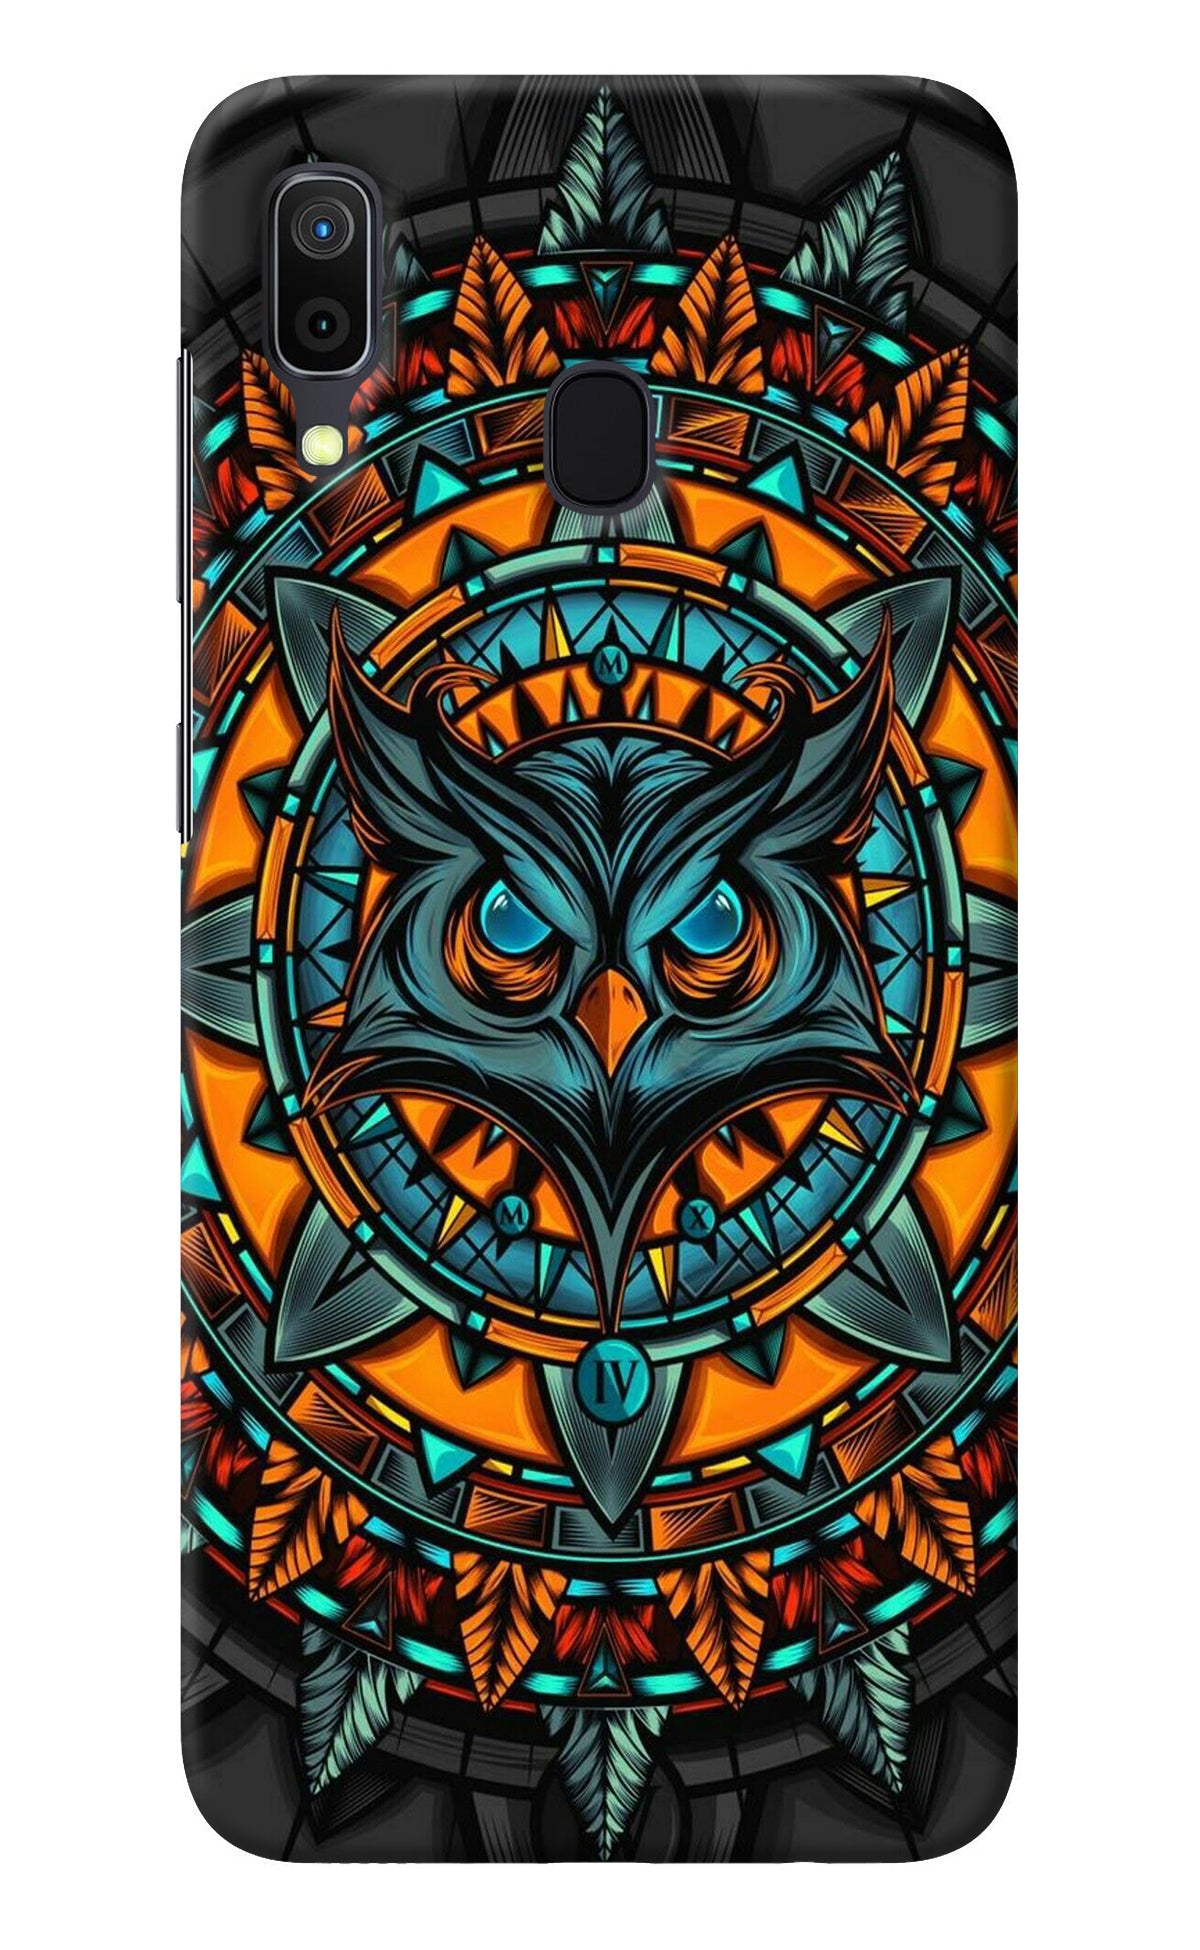 Angry Owl Art Samsung A30 Back Cover